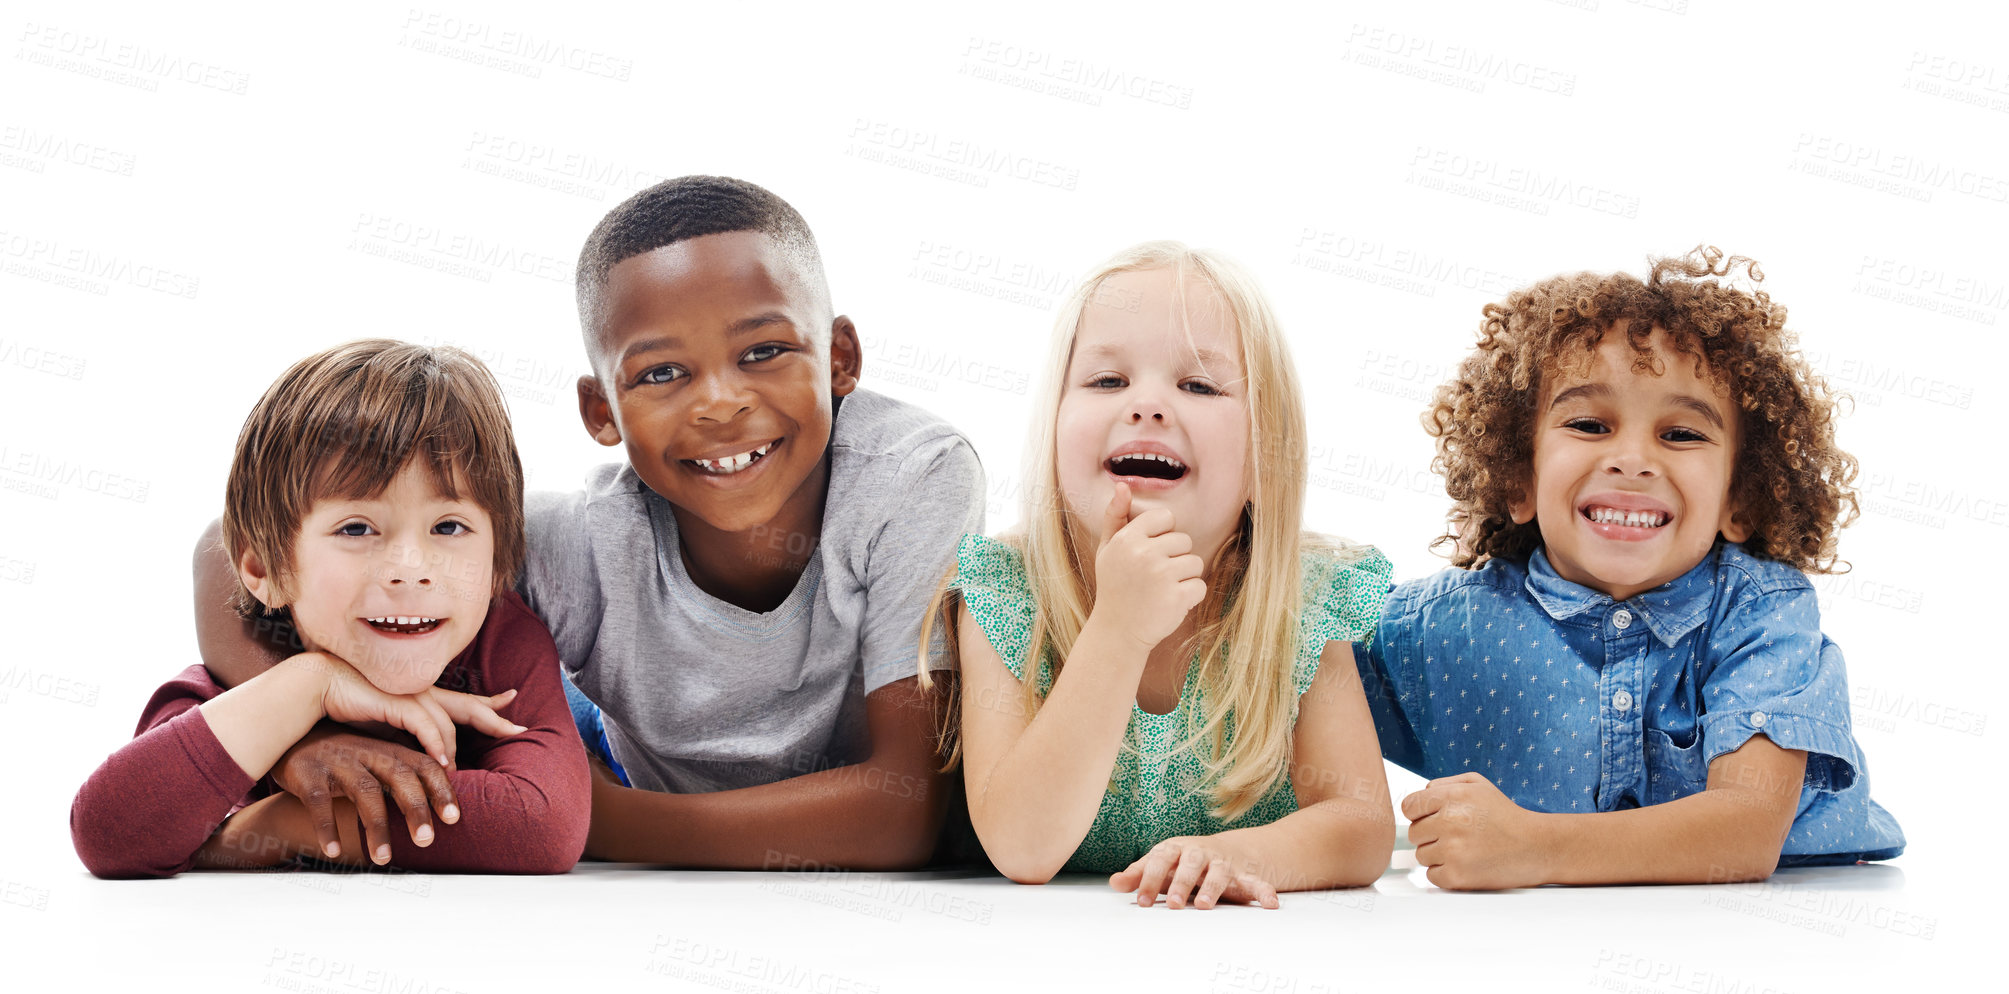 Buy stock photo Studio shot of a group of young friends lying on the floor together against a white background